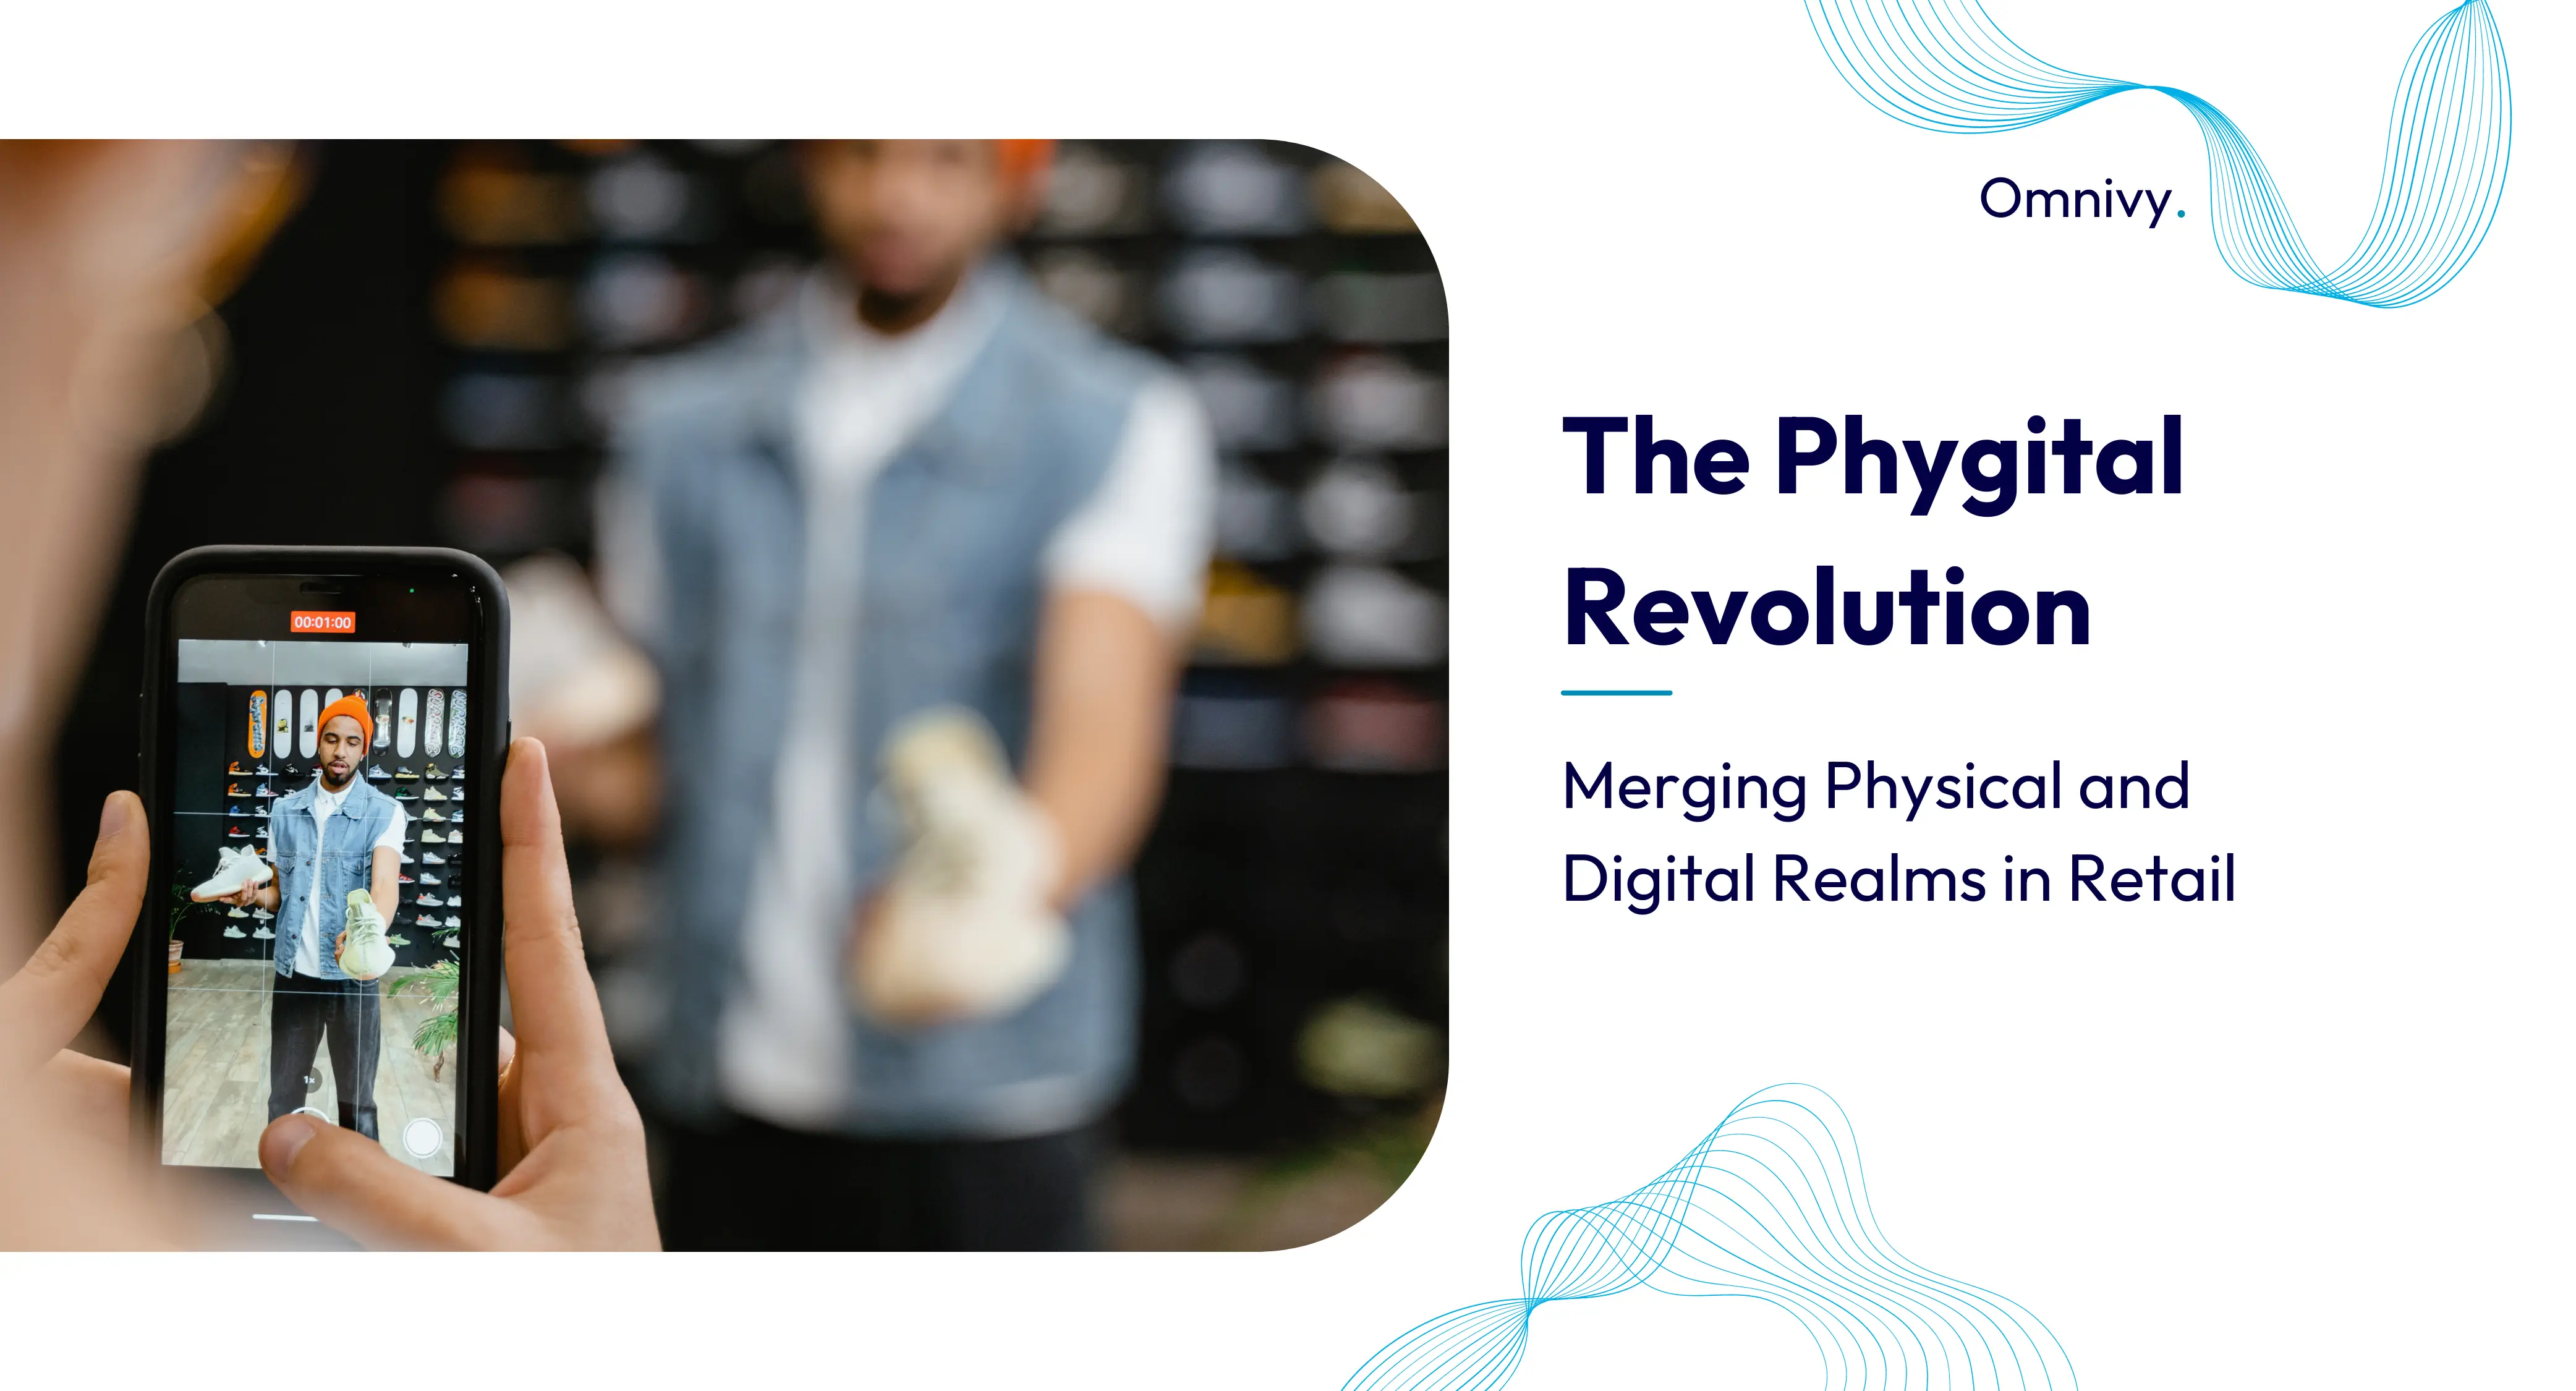 The Phygital Revolution - Merging Physical and Digital Realms in Retail